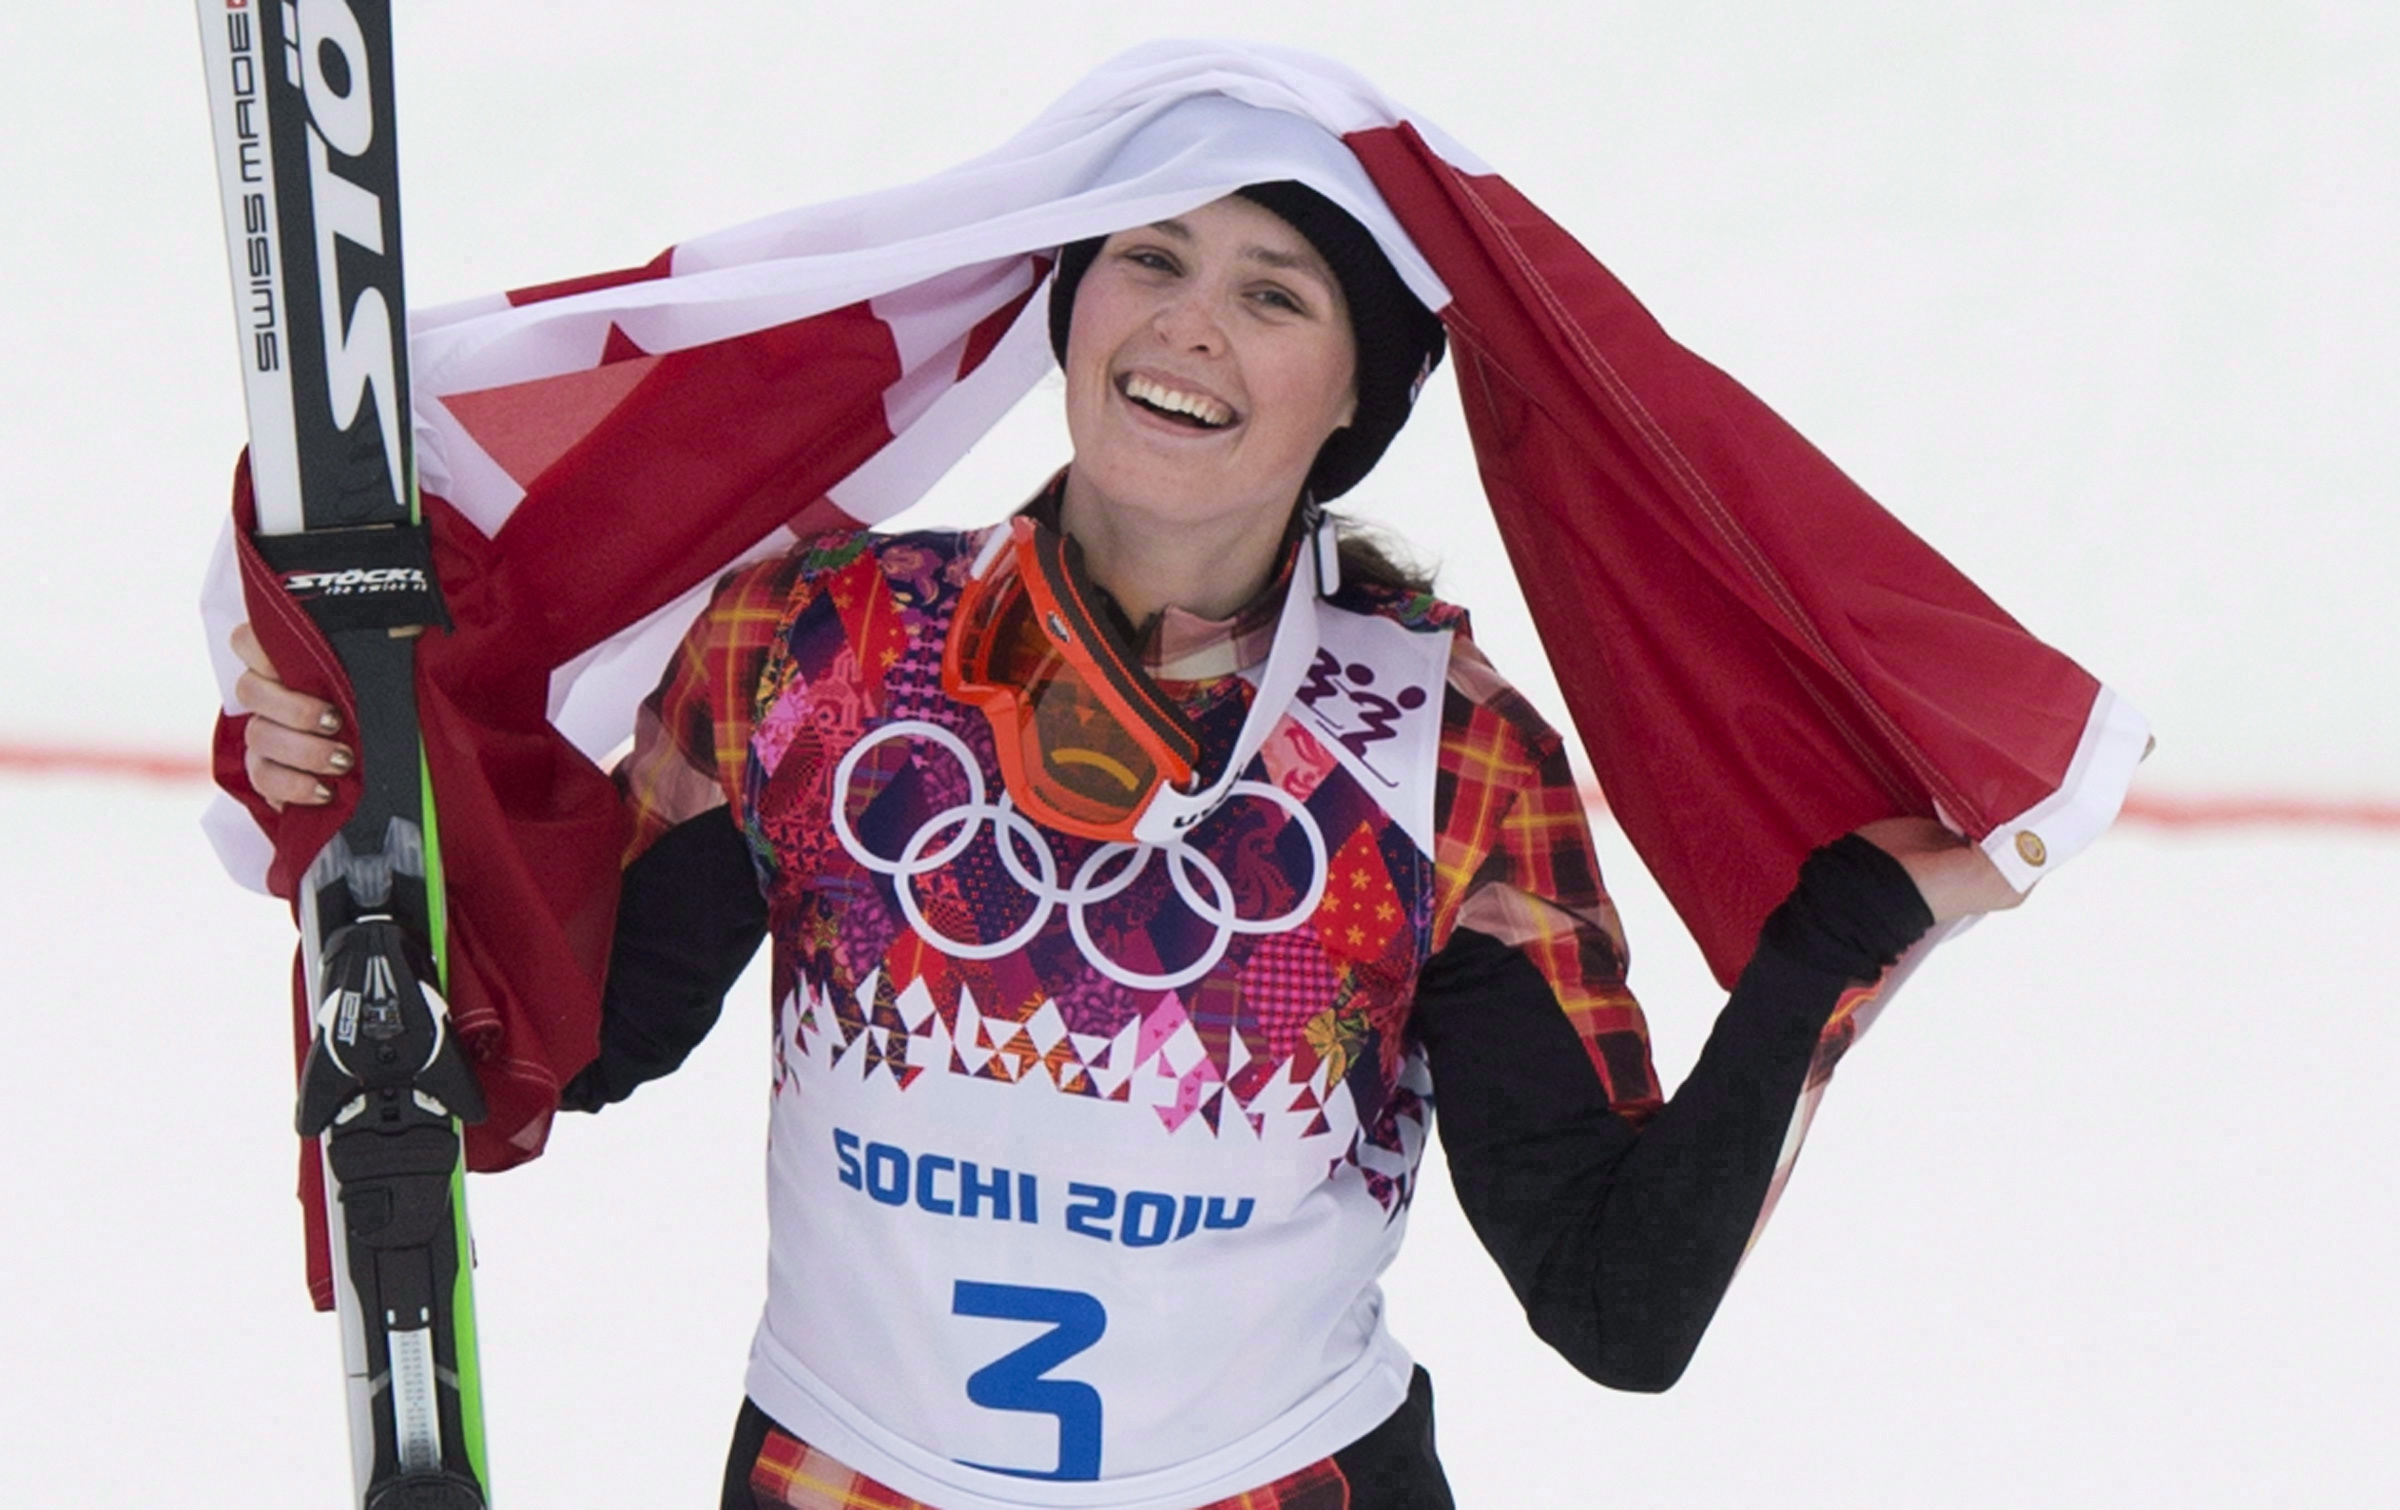 Canada's gold medallist Marielle Thompson celebrates her win following the women's ski cross final at the Sochi Winter Olympics in Krasnaya Polyana, Russia, Friday, Feb. 21, 2014. Thompson capped her dream season in style Sunday by winning her second career Crystal Globe.Thompson, who won Olympic gold last month at the Sochi Games, edged Fanny Smith of Switzerland to win the final World Cup of the season Sunday and the overall title.